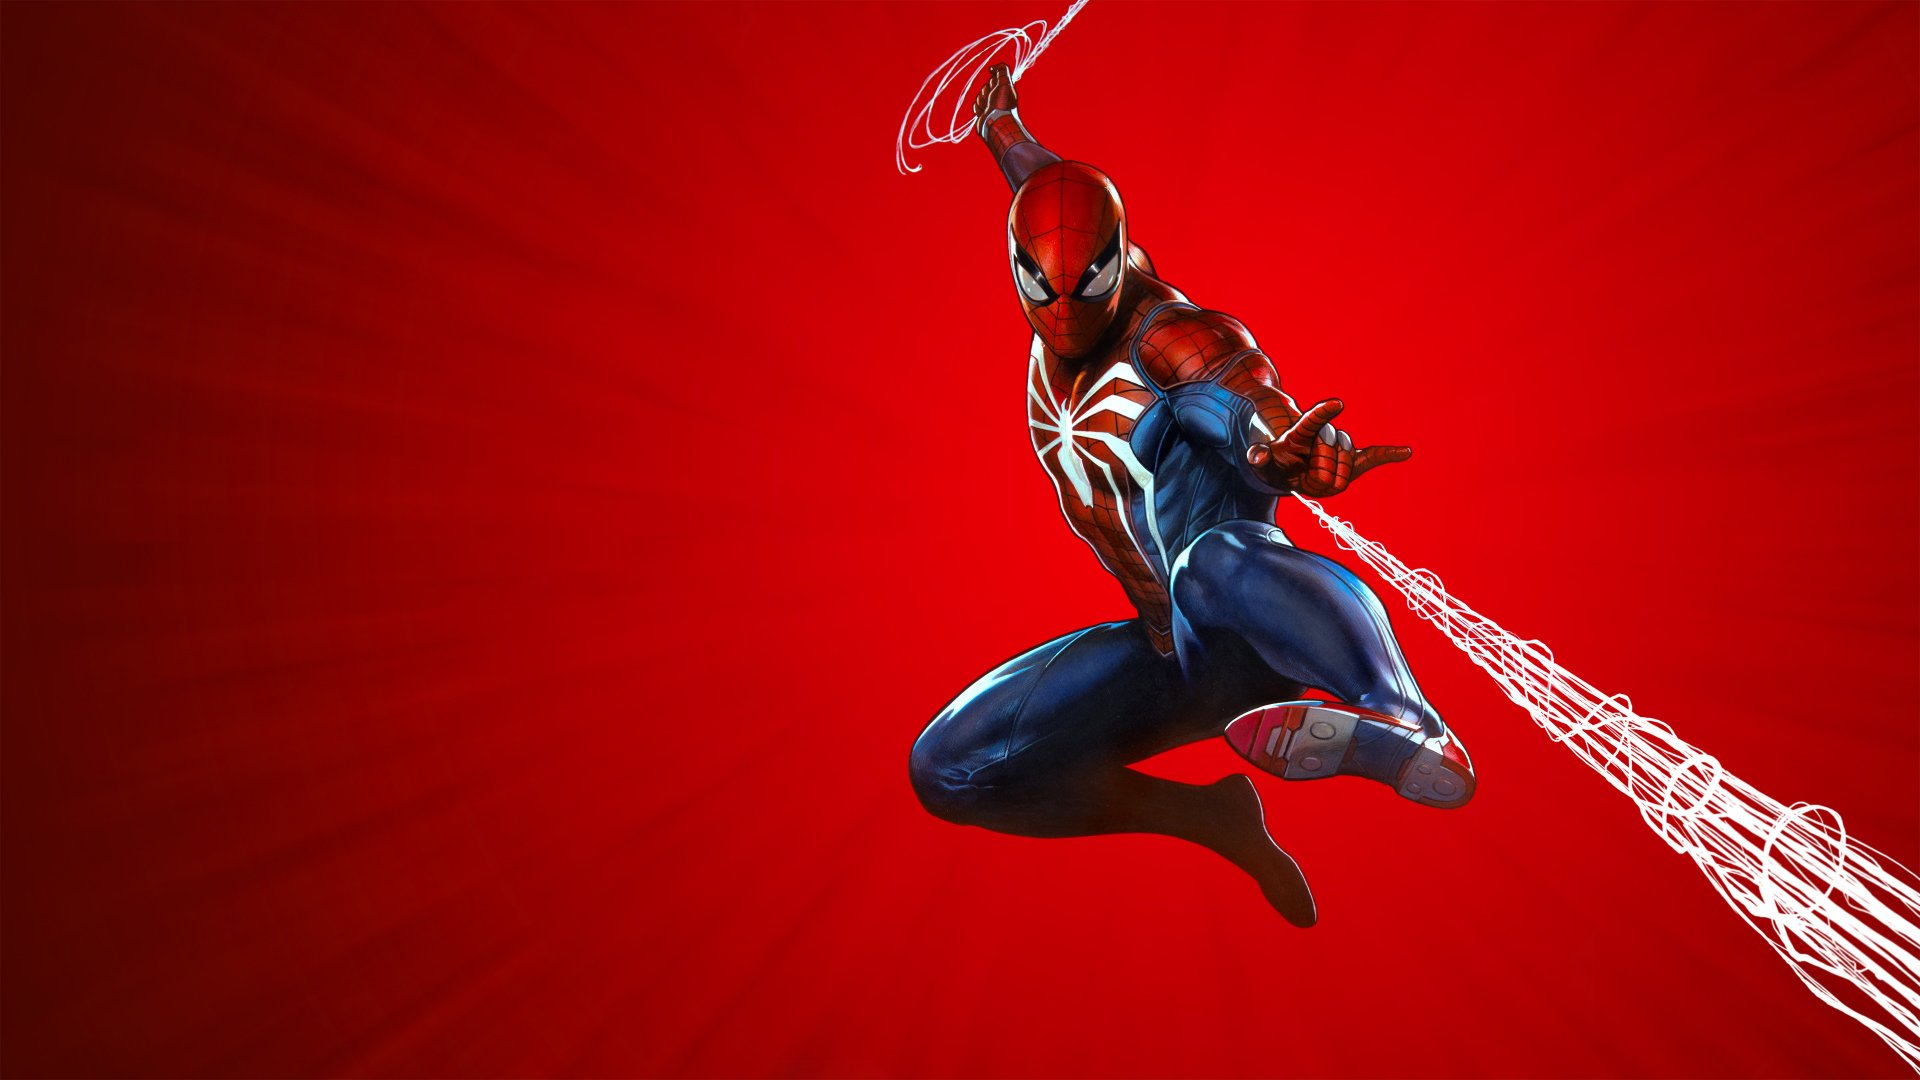 Marvel’s Spider-Man Free HD Wallpapers 1920×1080